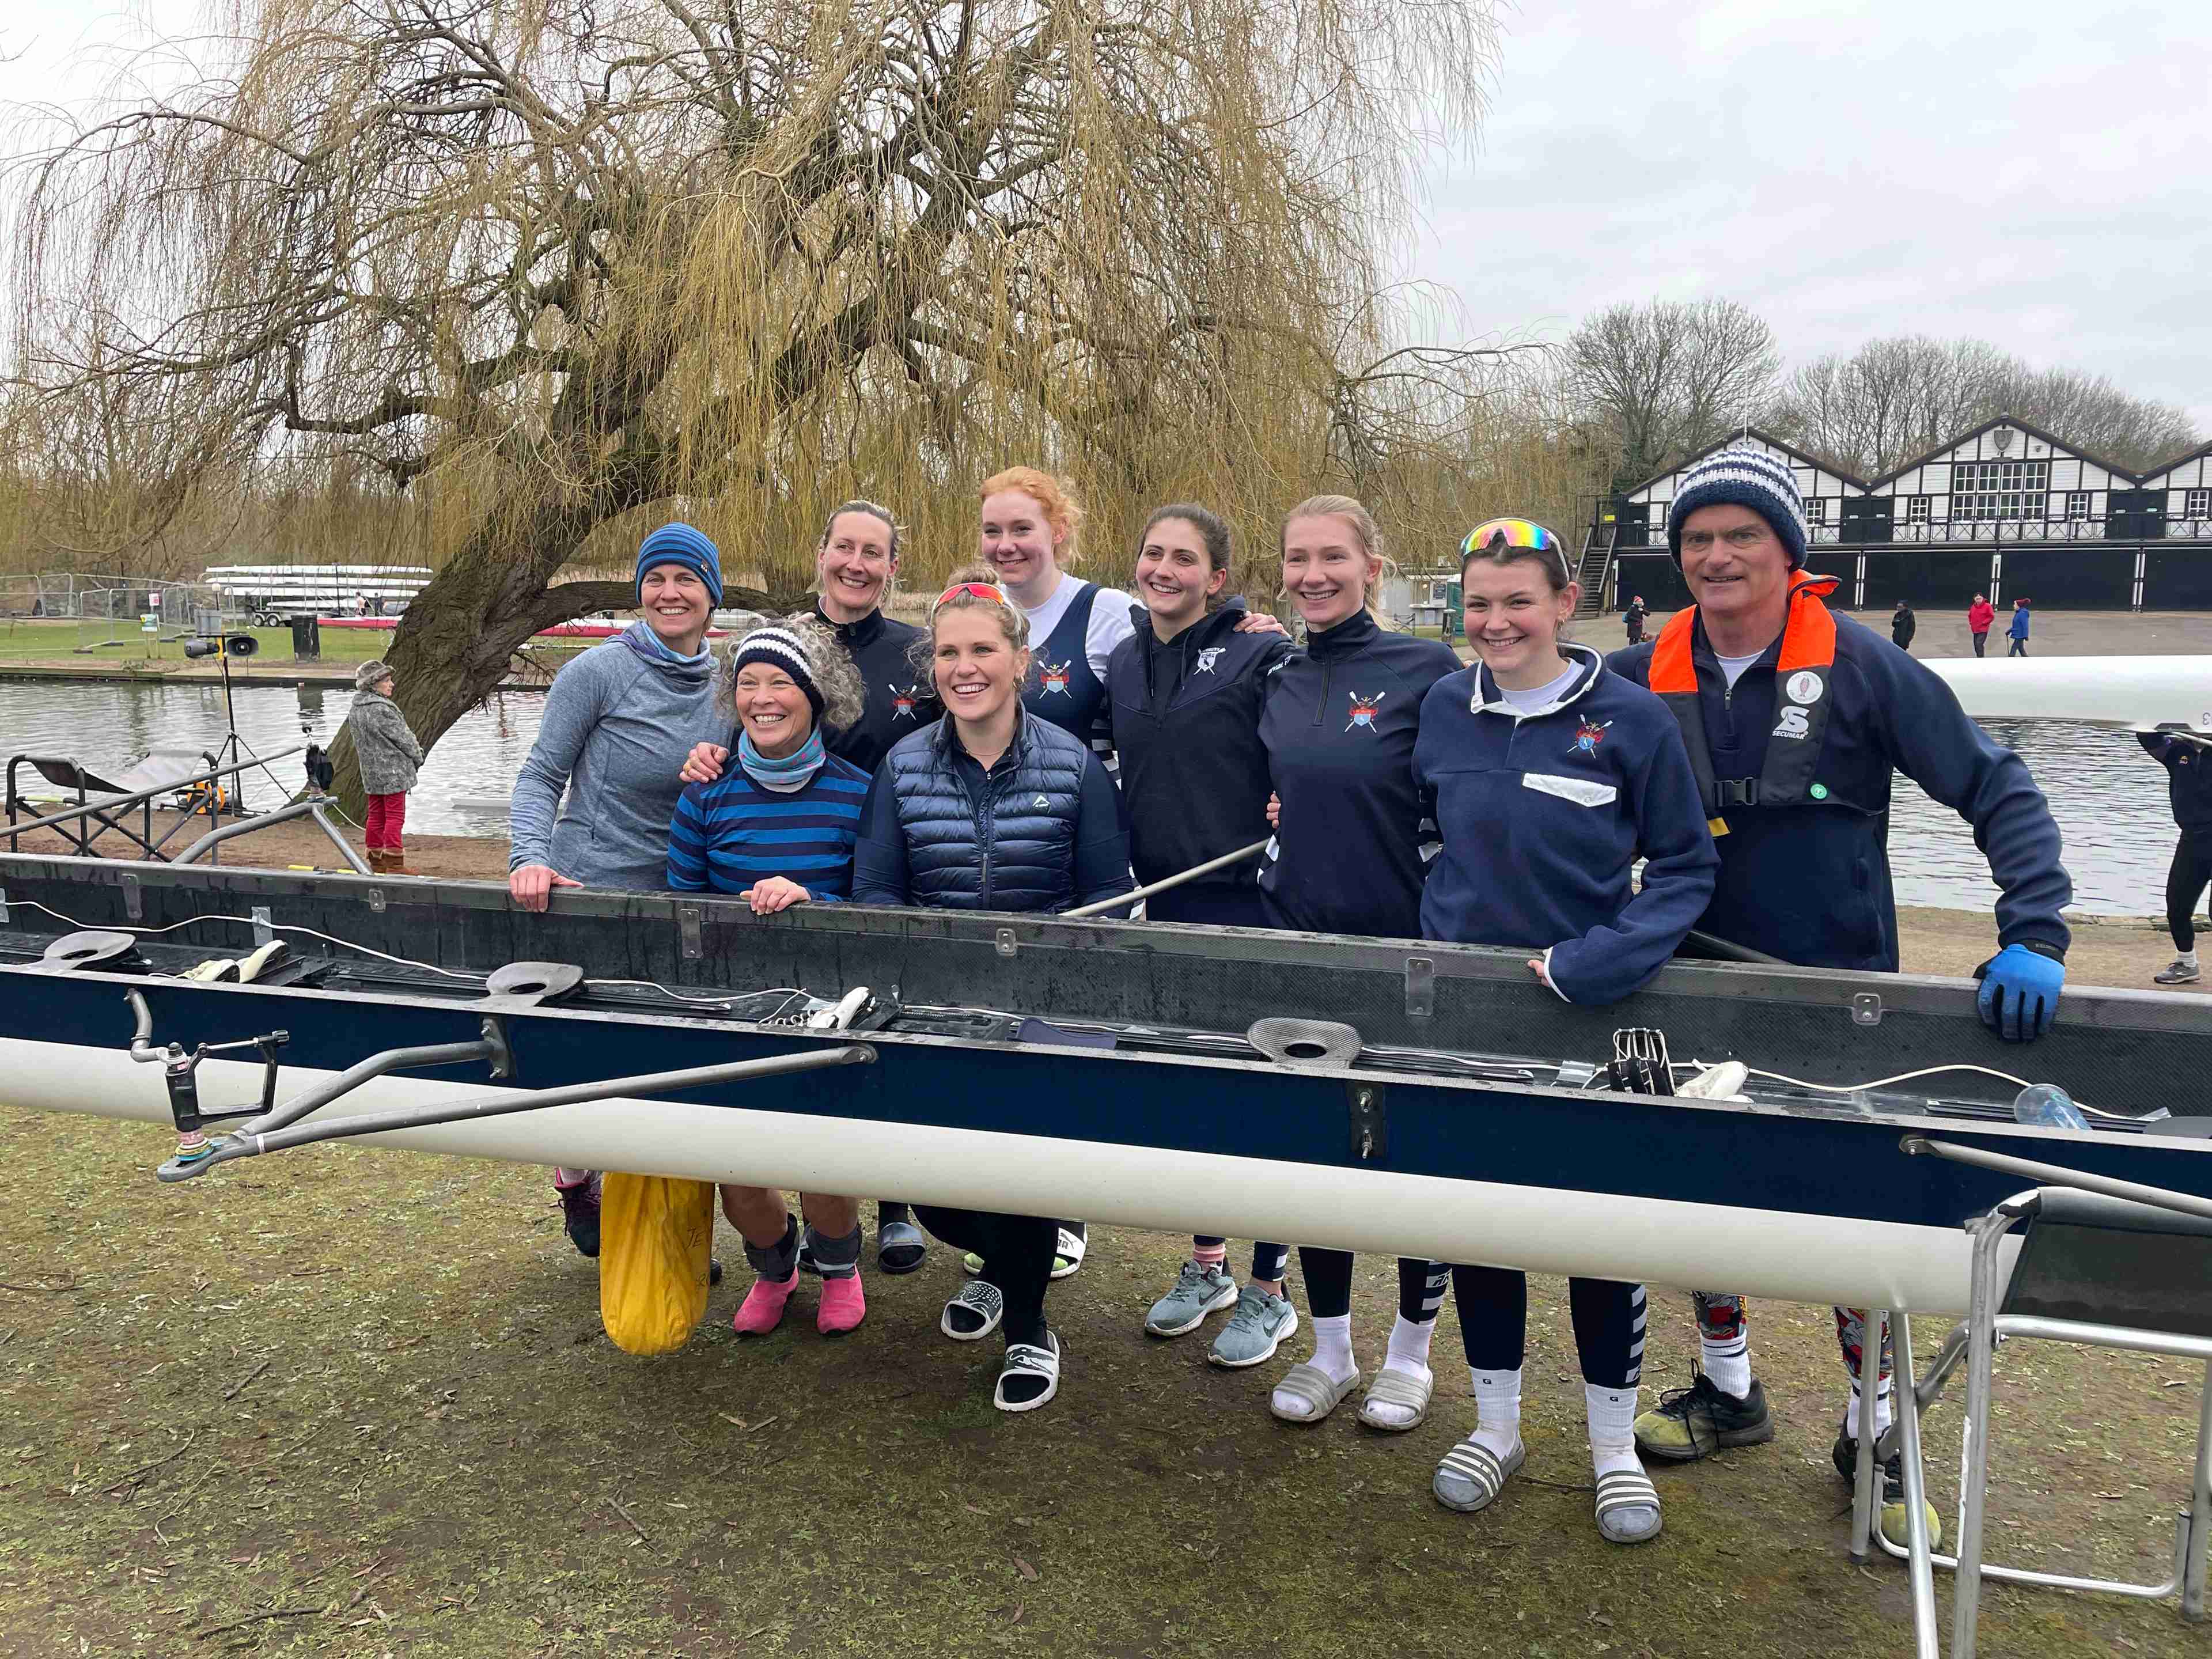 Sudbury’s victorious women’s eight stands behind their boat, which is on trestles on the foul-fouled patch of grass on the bank opposite Bedford Rowing Club. There's a weeping willow growing at a 45 degree angle in the background. 